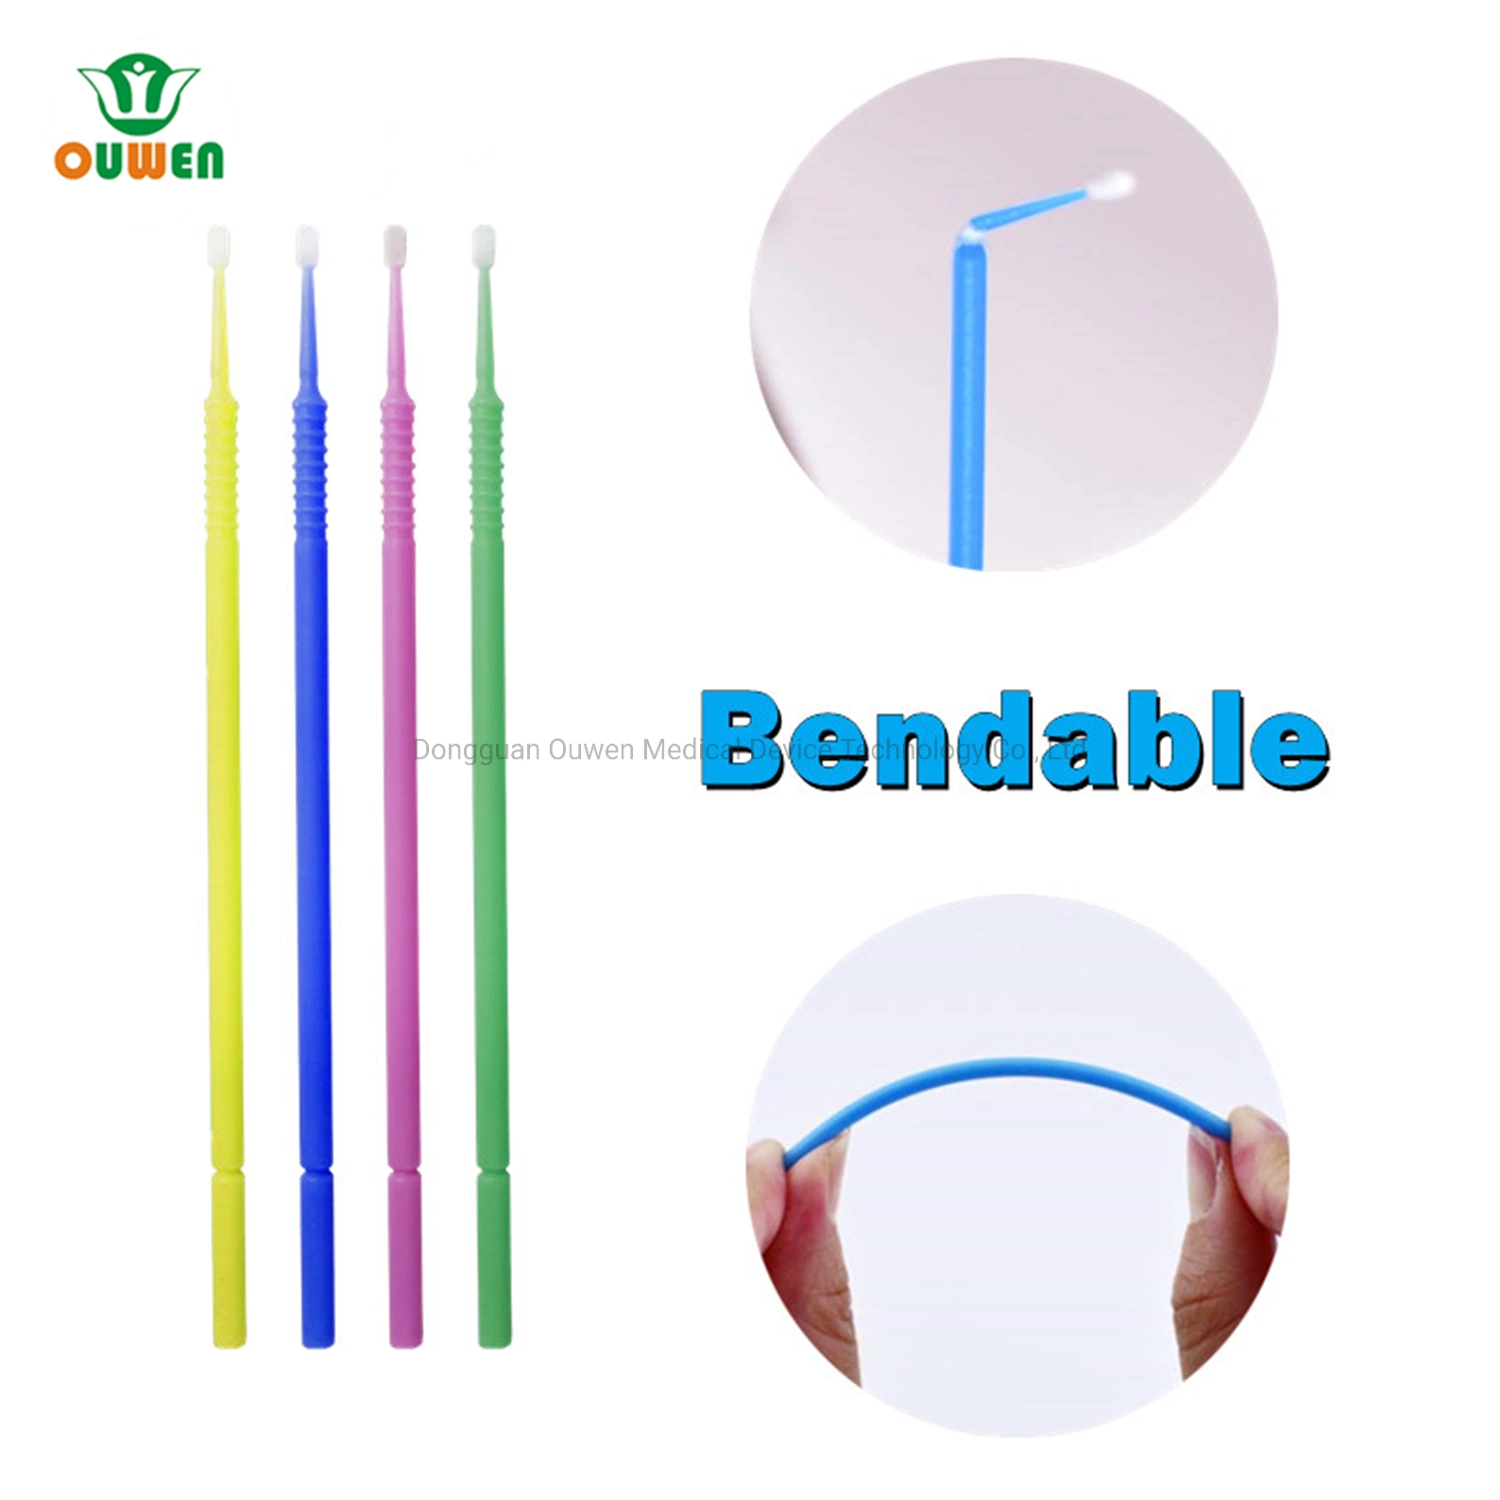 Ouwenfactory Directsale ISO13485/CE/FDA Bendable Disposable Dental Microbrush 1.2mm/1.5mm/2.0mm/2.5mm Applicator Stick